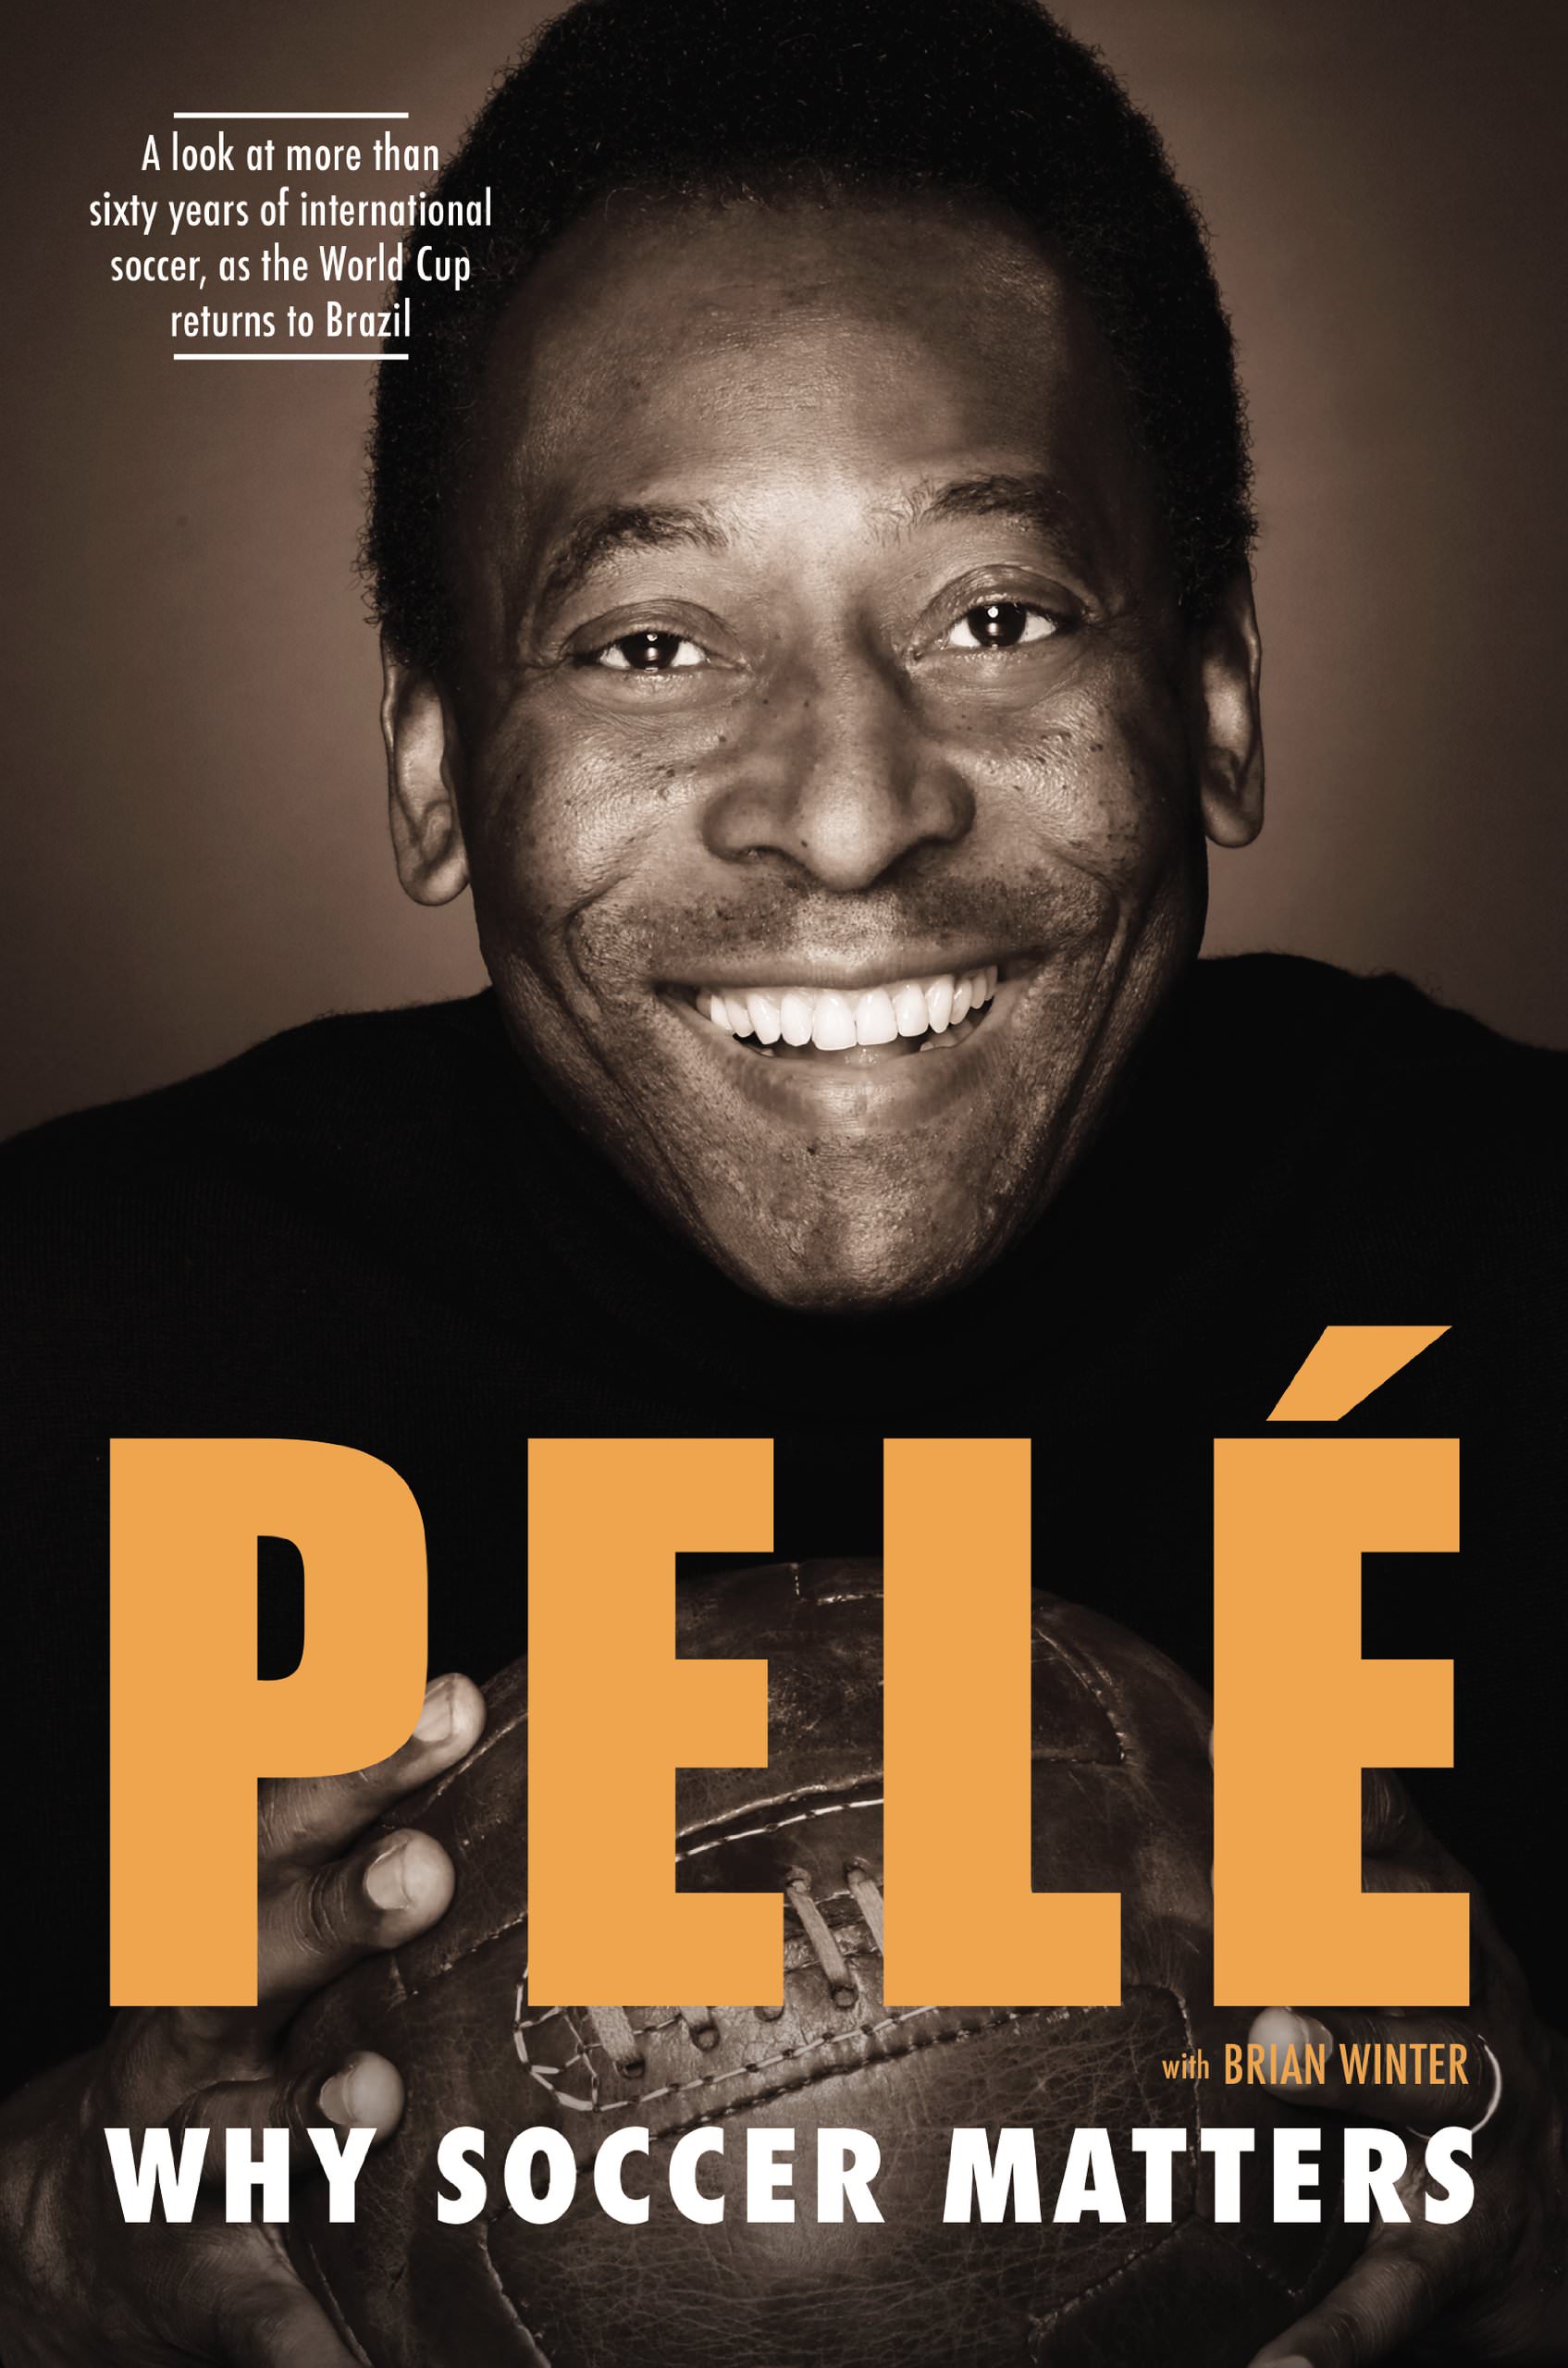 Book Review: Why Soccer Matters - Pelé and Brian Winter